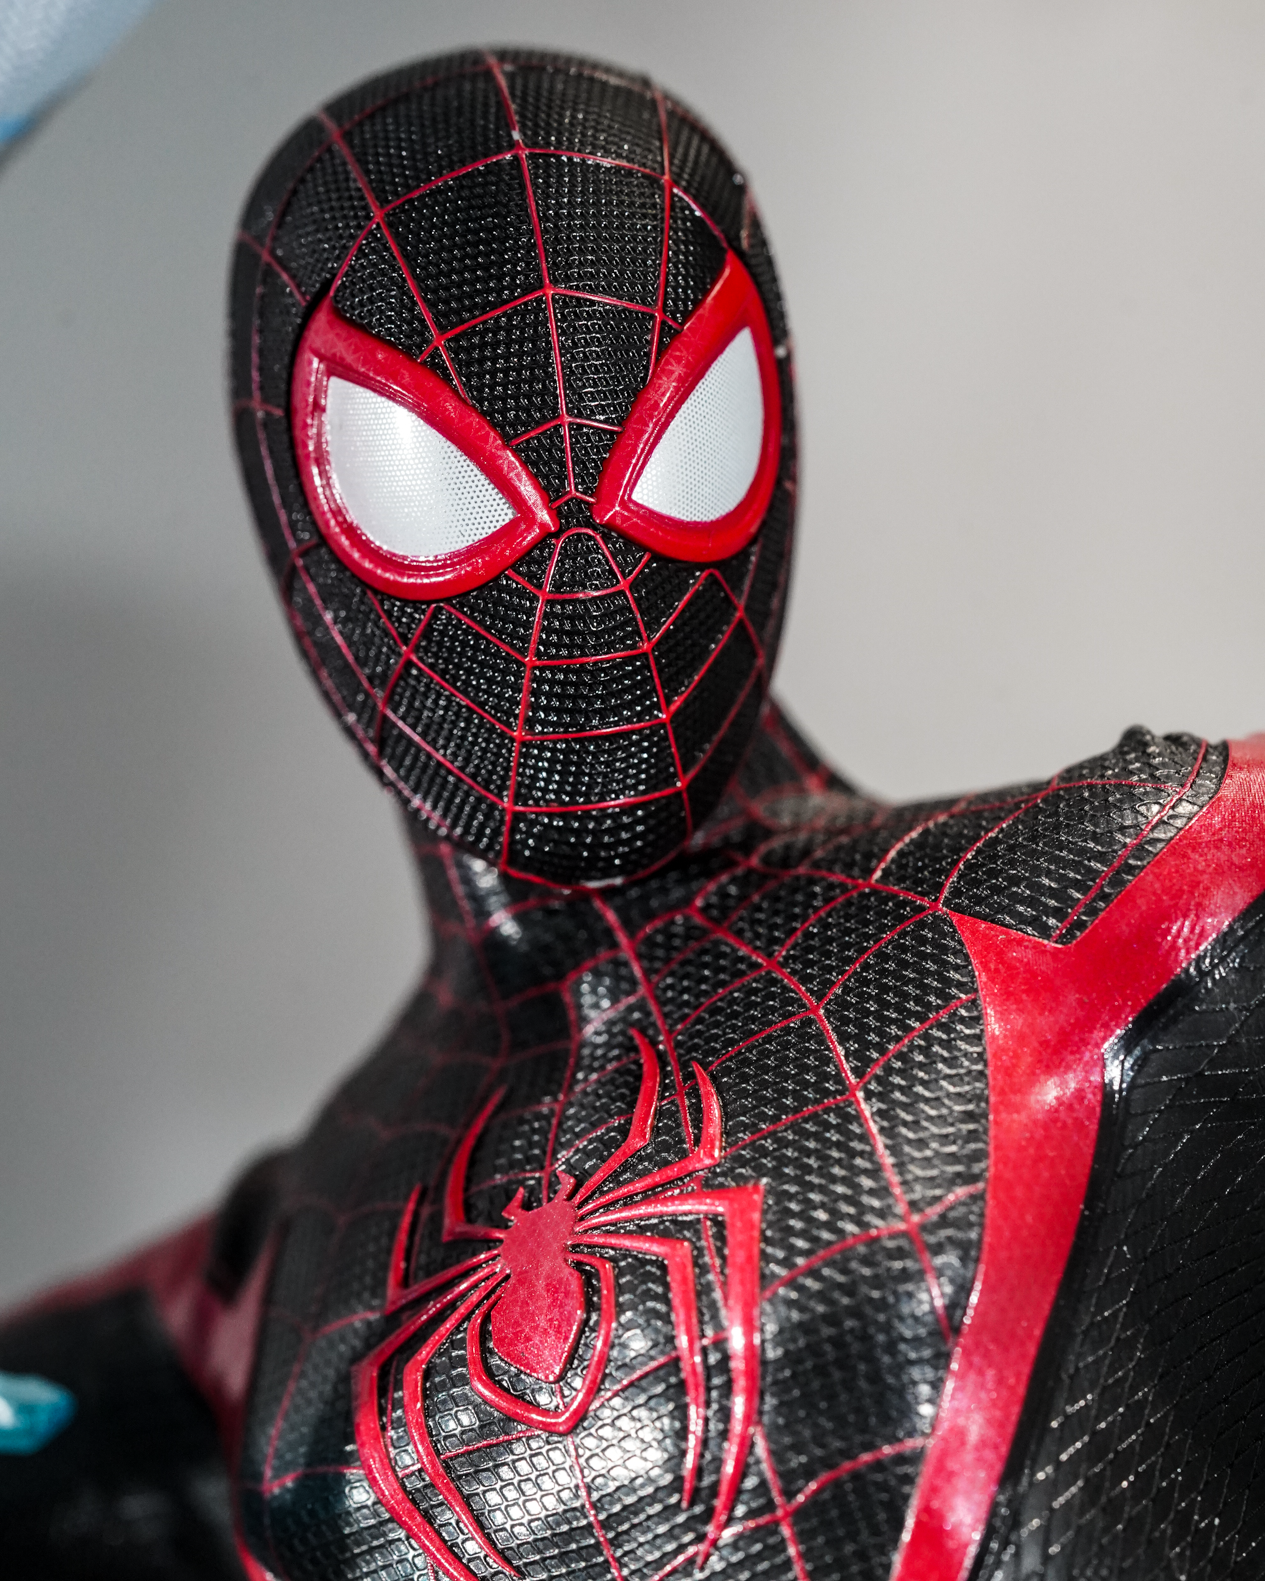 Miles Morales (Upgraded Suit) Sixth Scale Figure by Hot Toys